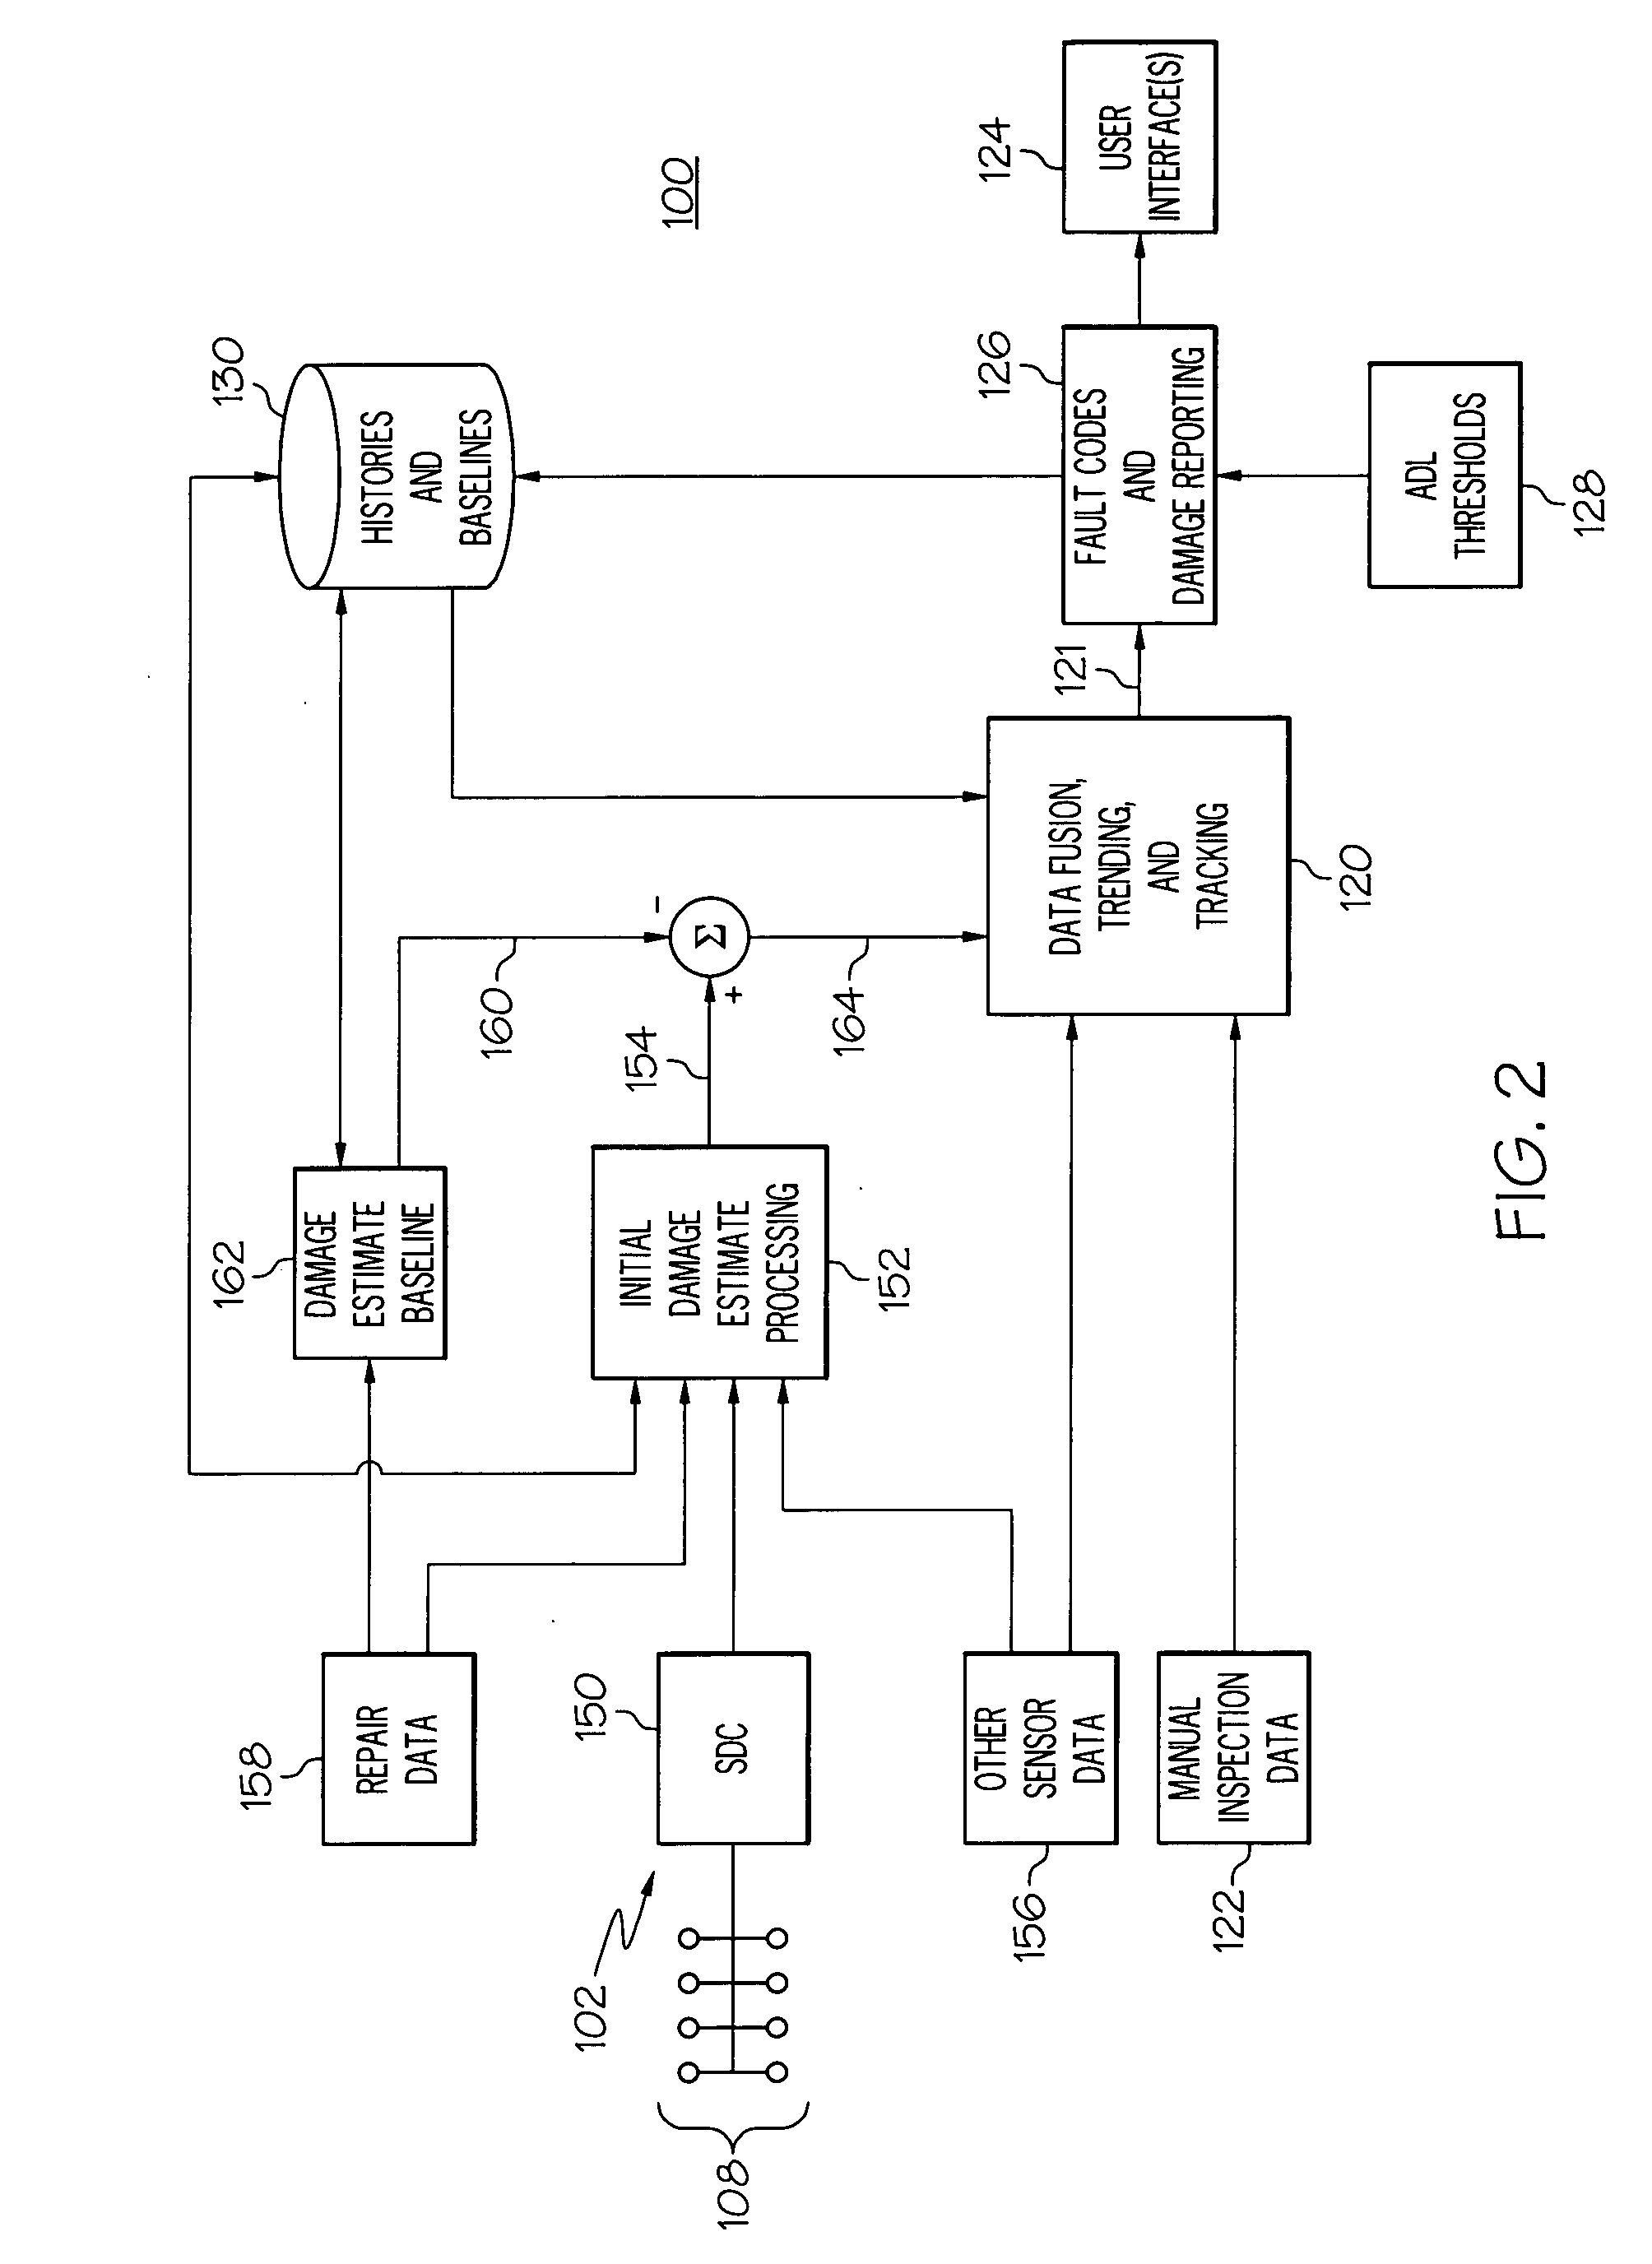 Structure health monitoring system and method